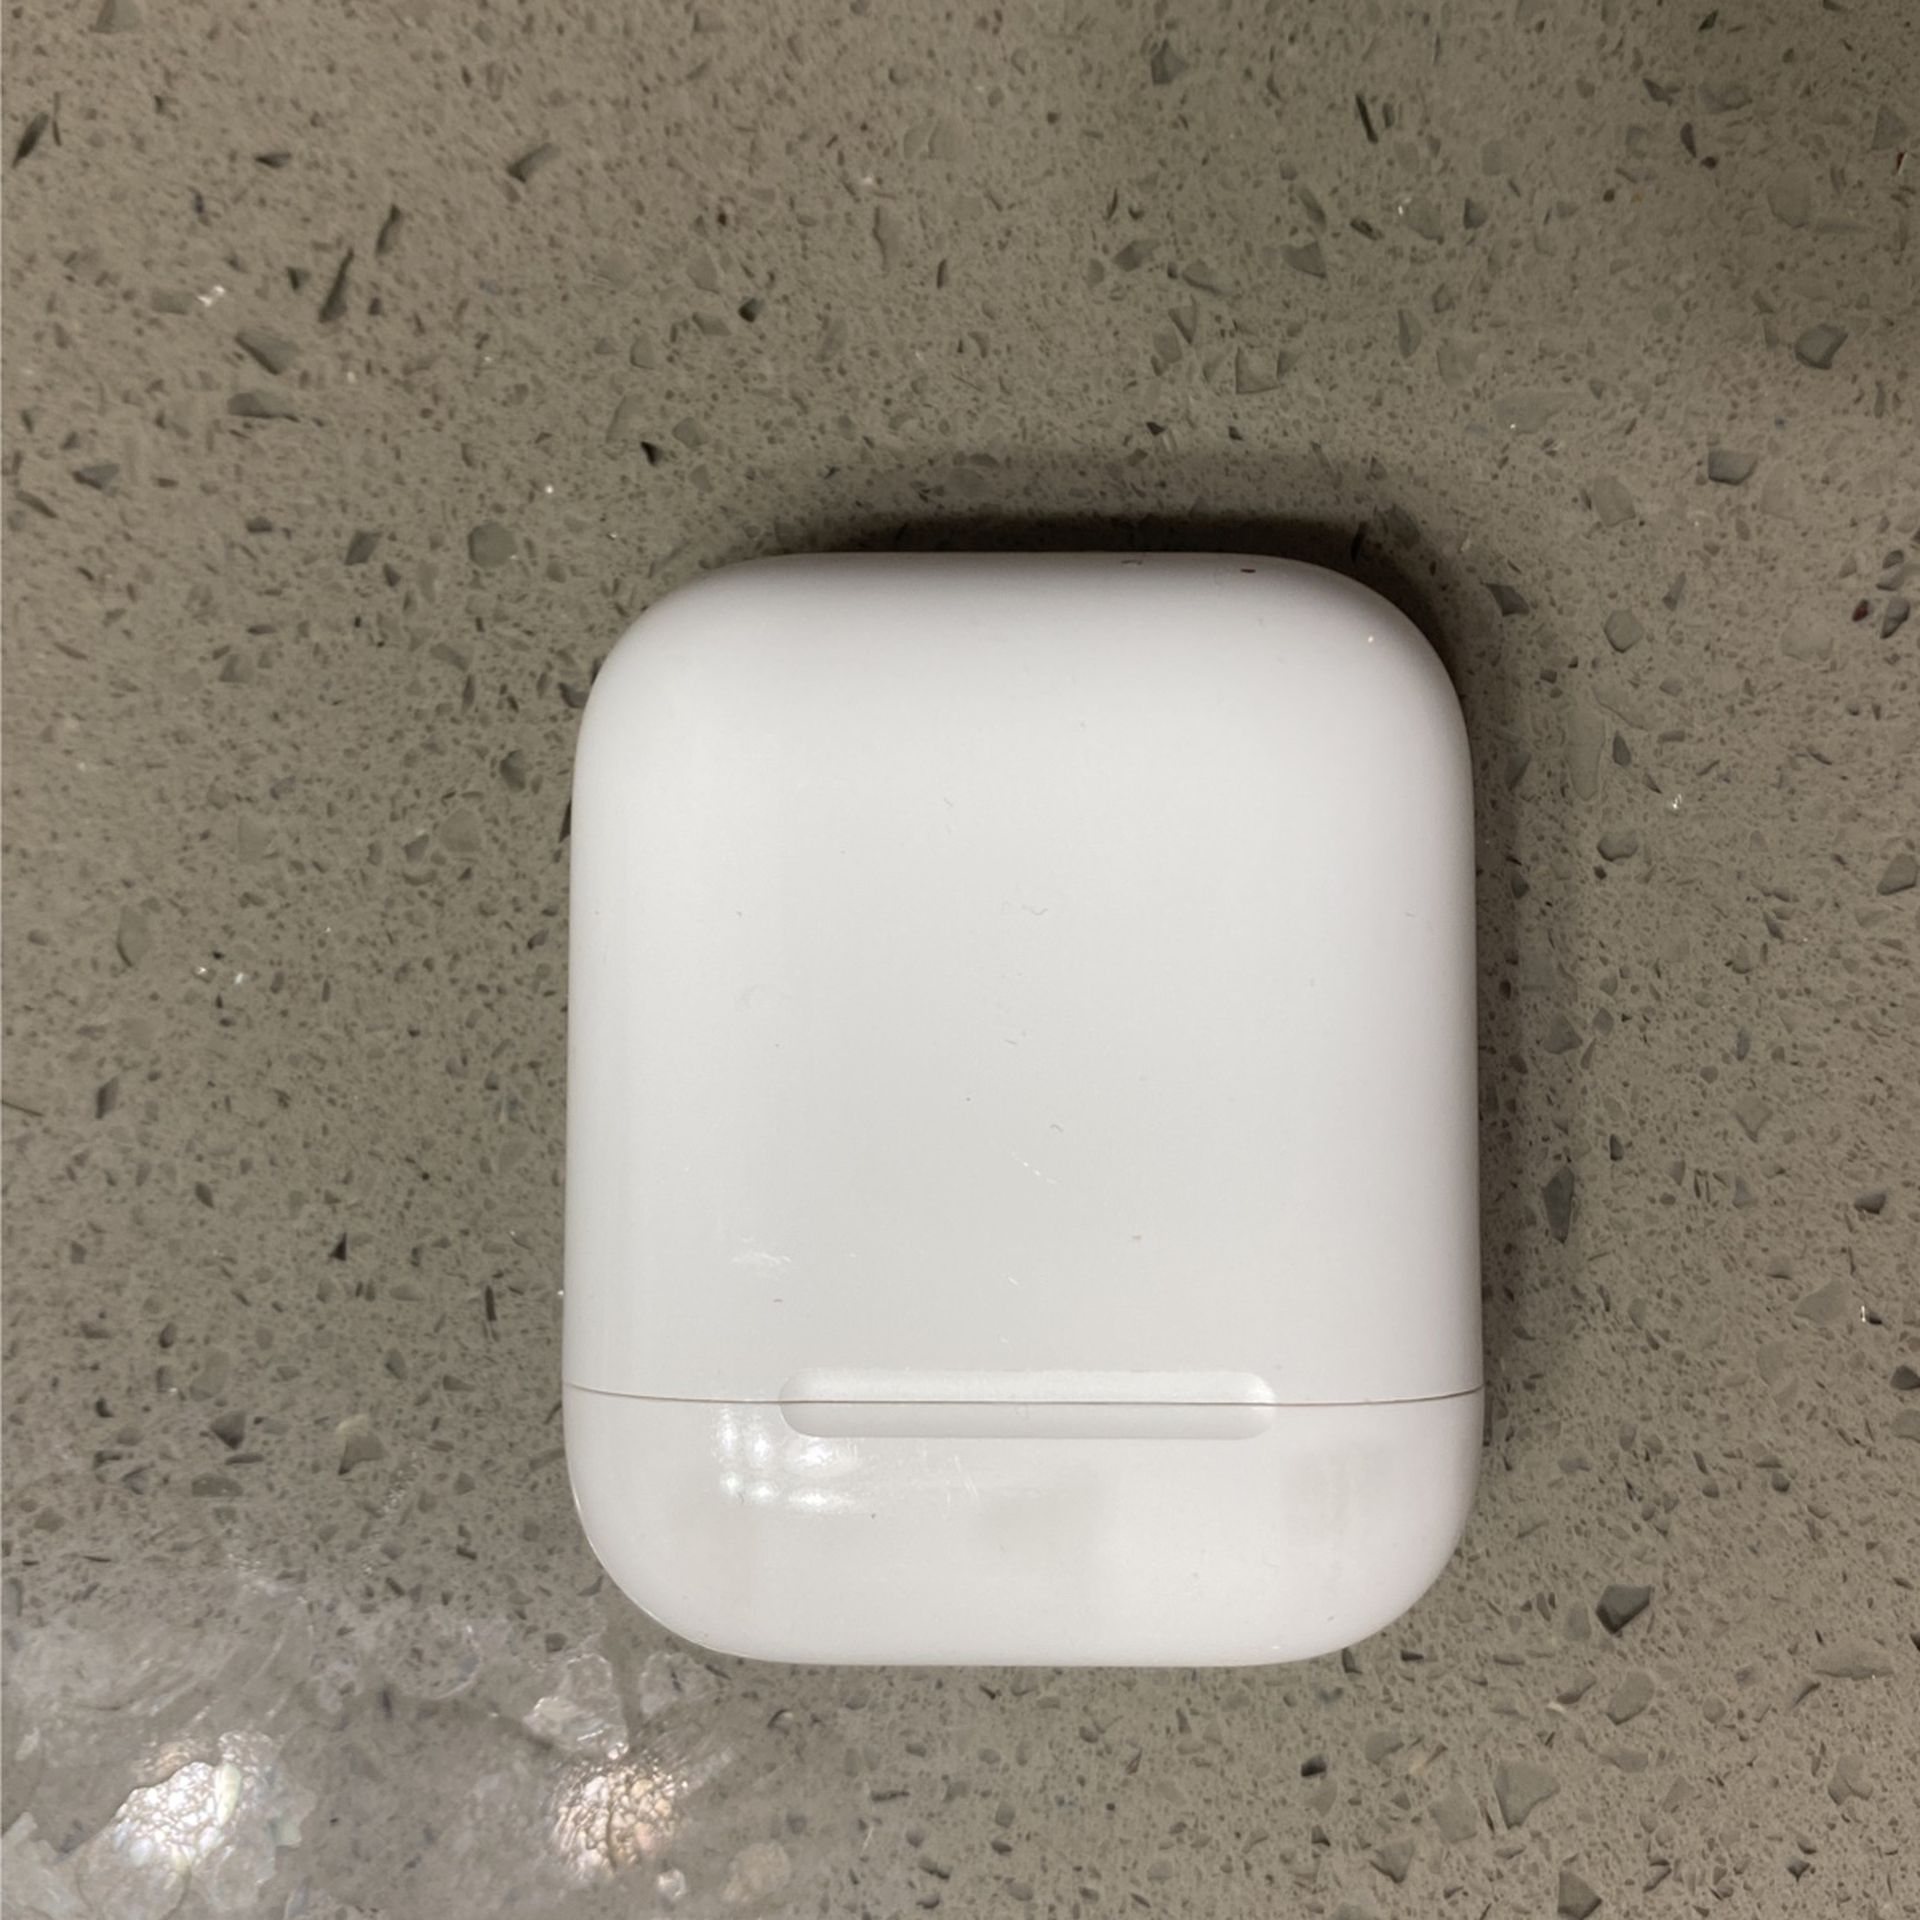 Apple Airpods - 2nd generation